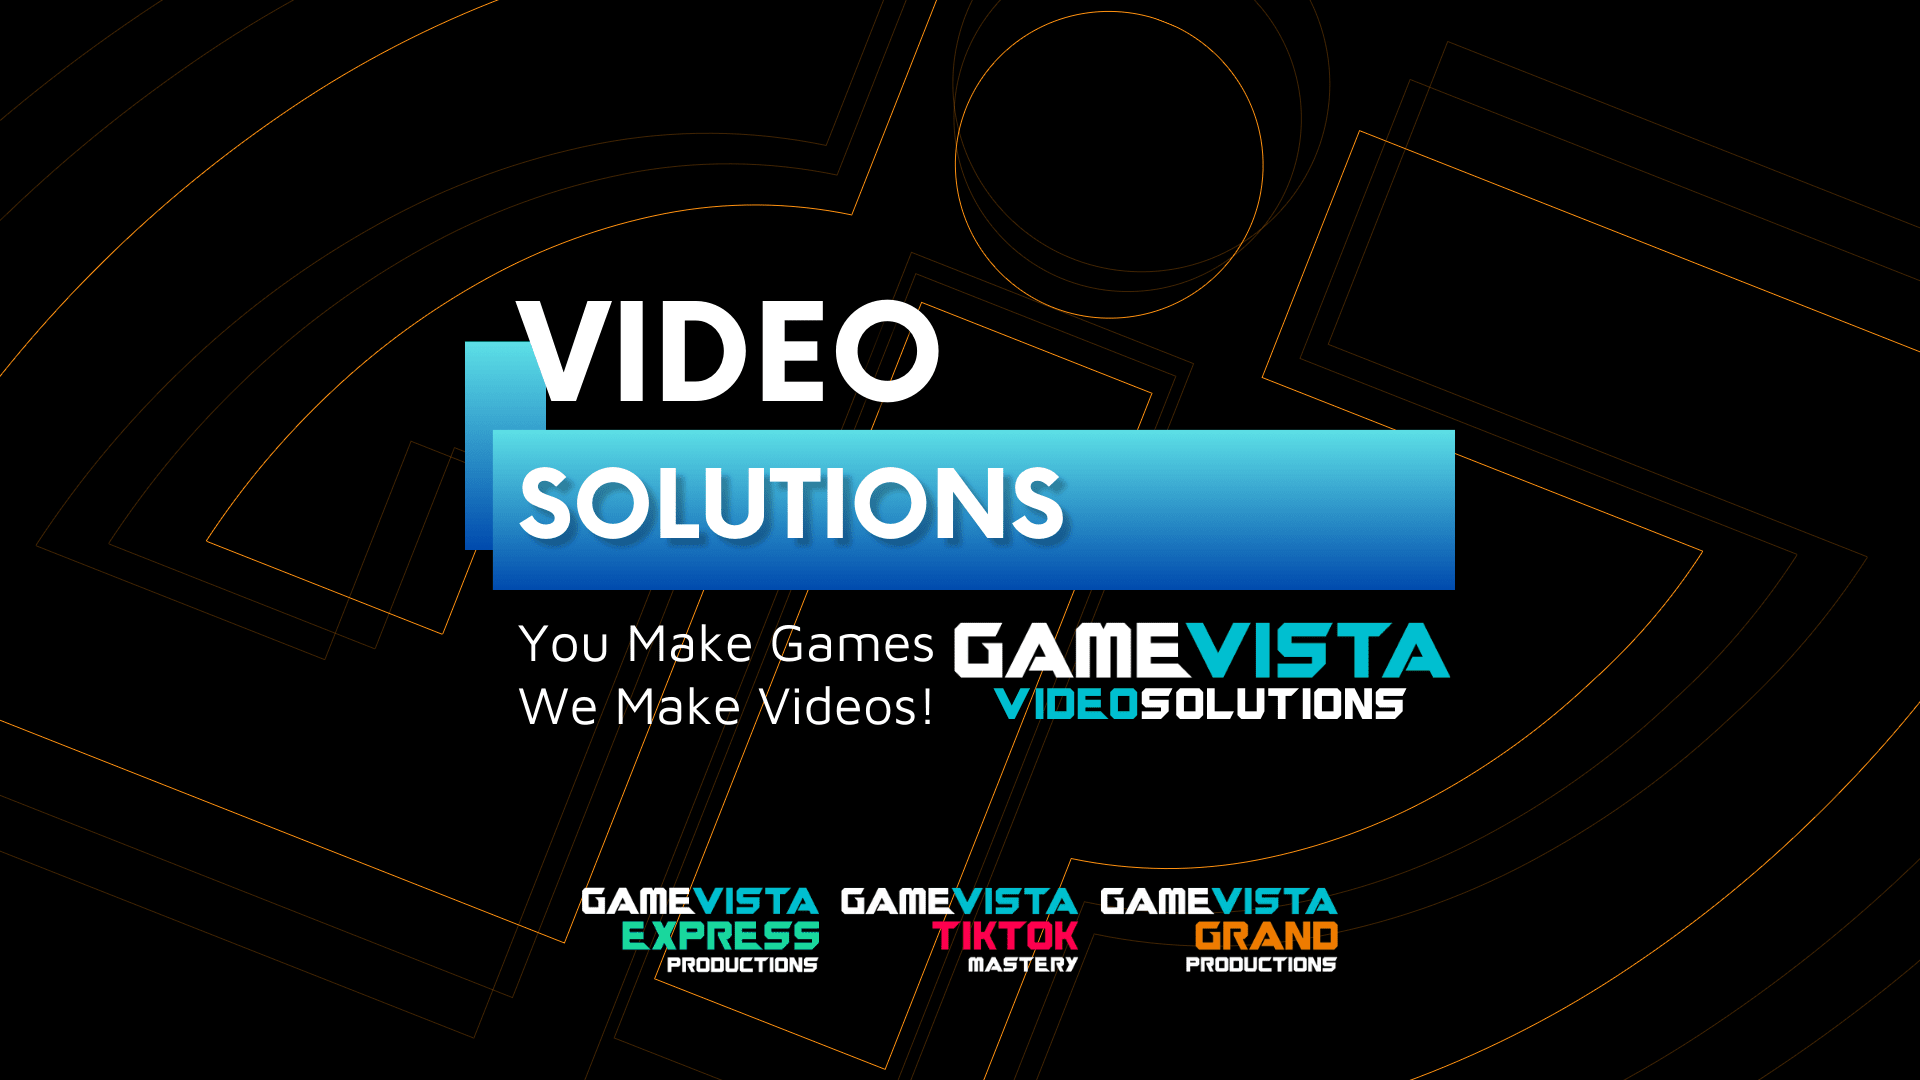 Gaming and Esports Agency - GAMEVISTA Video Solutions for Games